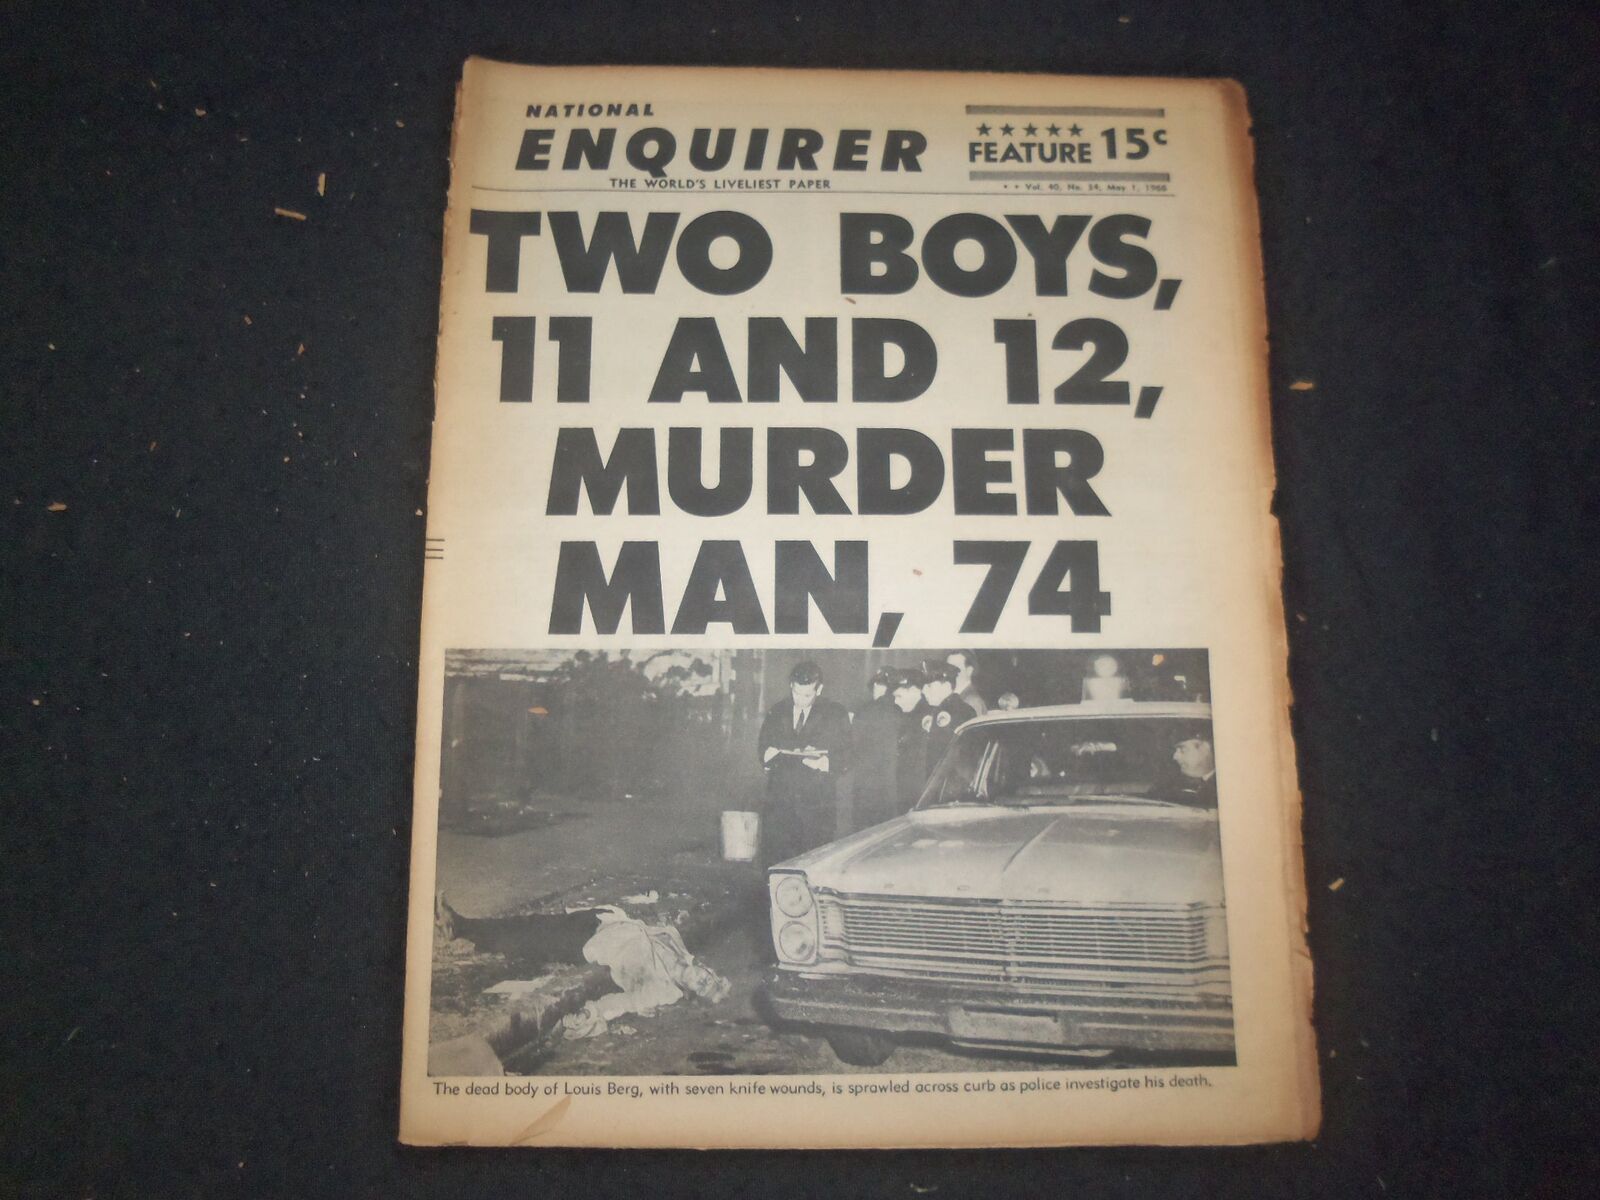 1966 MAY 1 NATIONAL ENQUIRER NEWSPAPER - TWO BOYS MURDER MAN, 74 - NP 7411